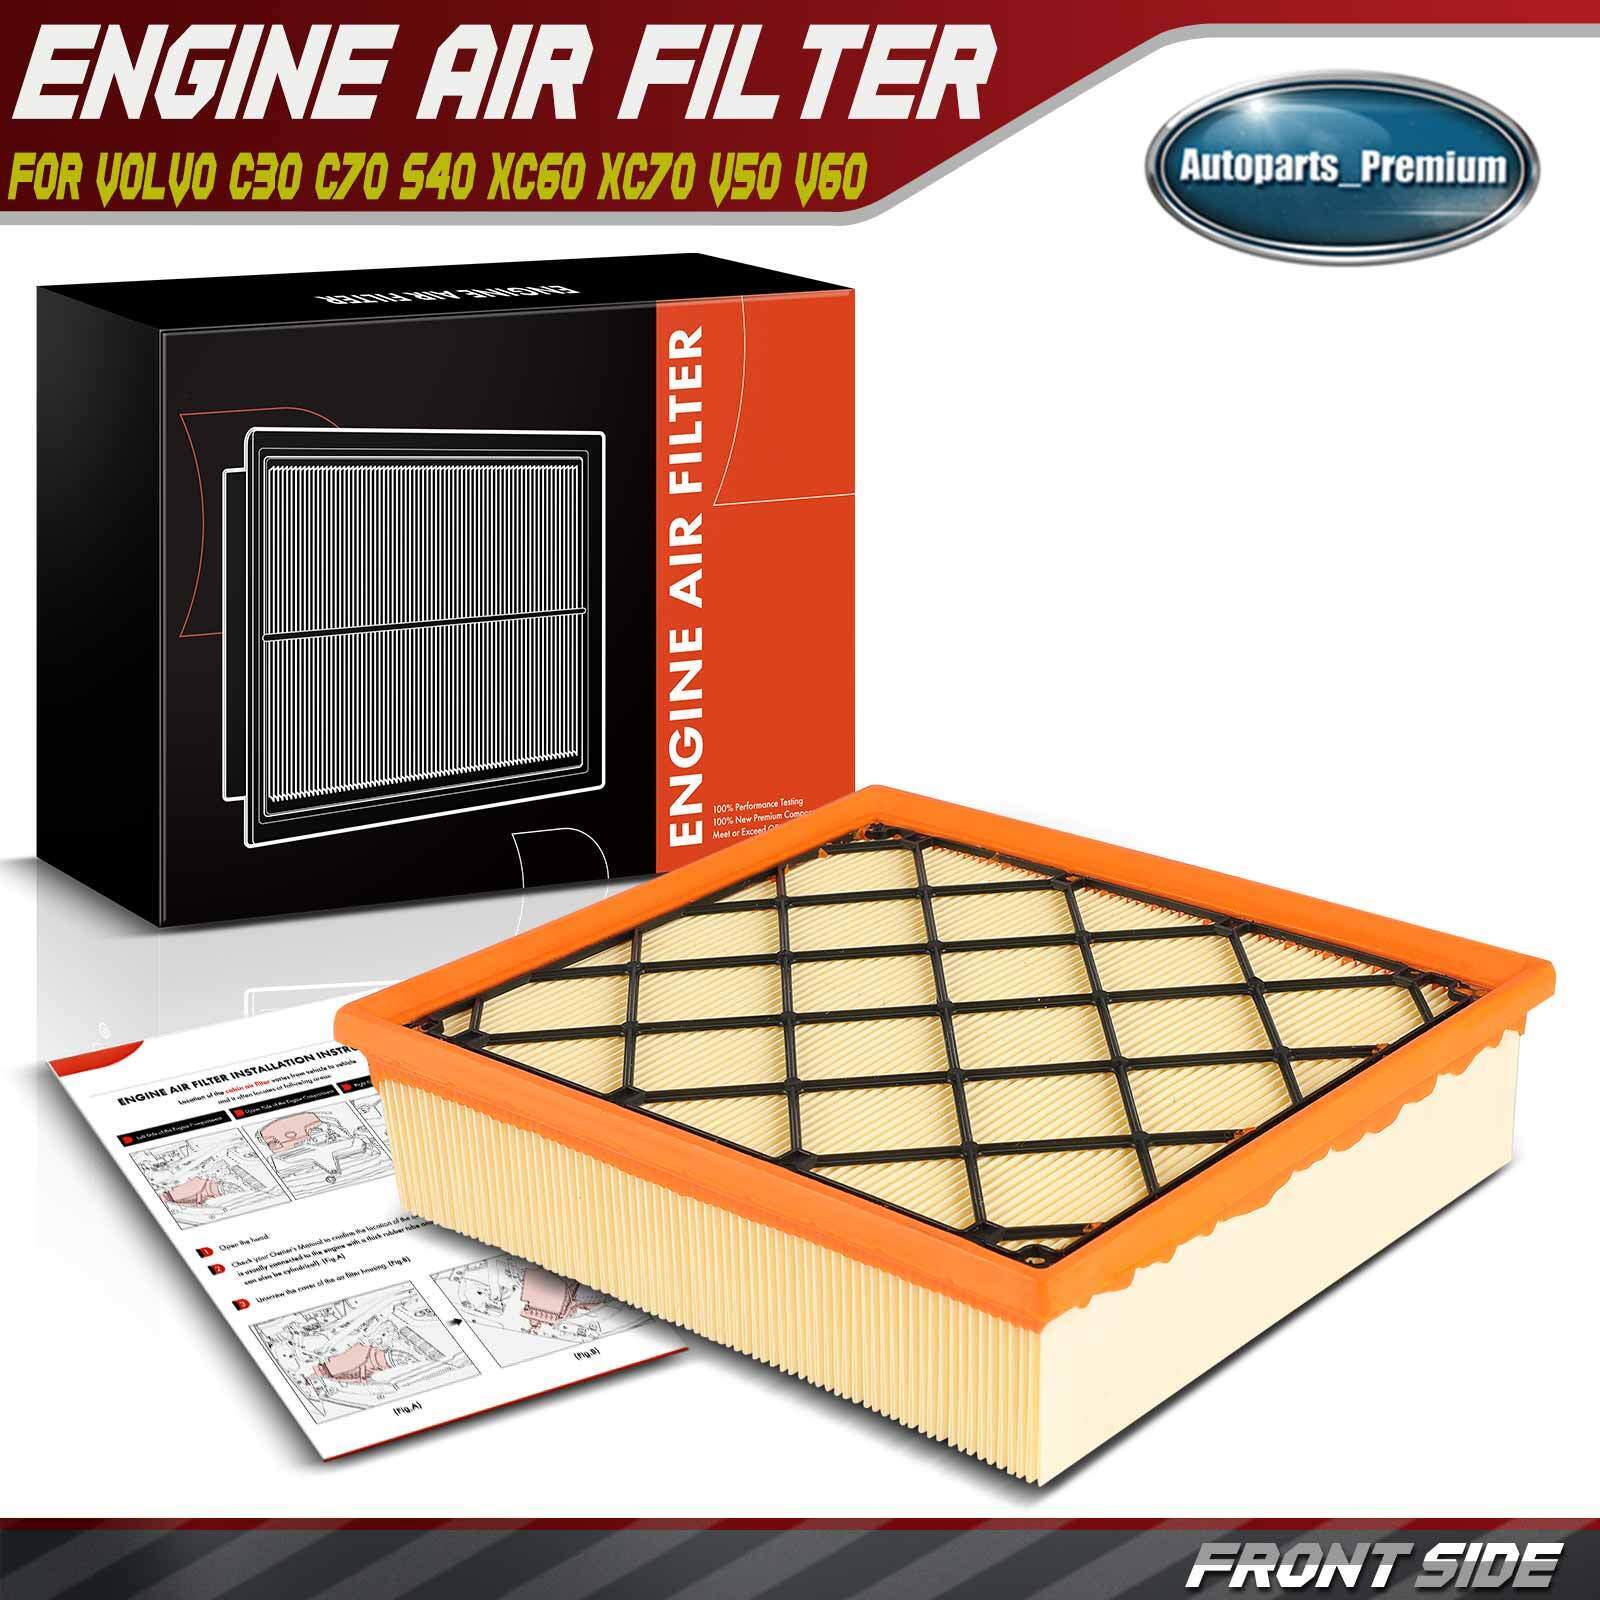 Engine Air Filter for Volvo C30 S40 XC60 XC70 V50 V60 Cross Country 2.4L 2.5L